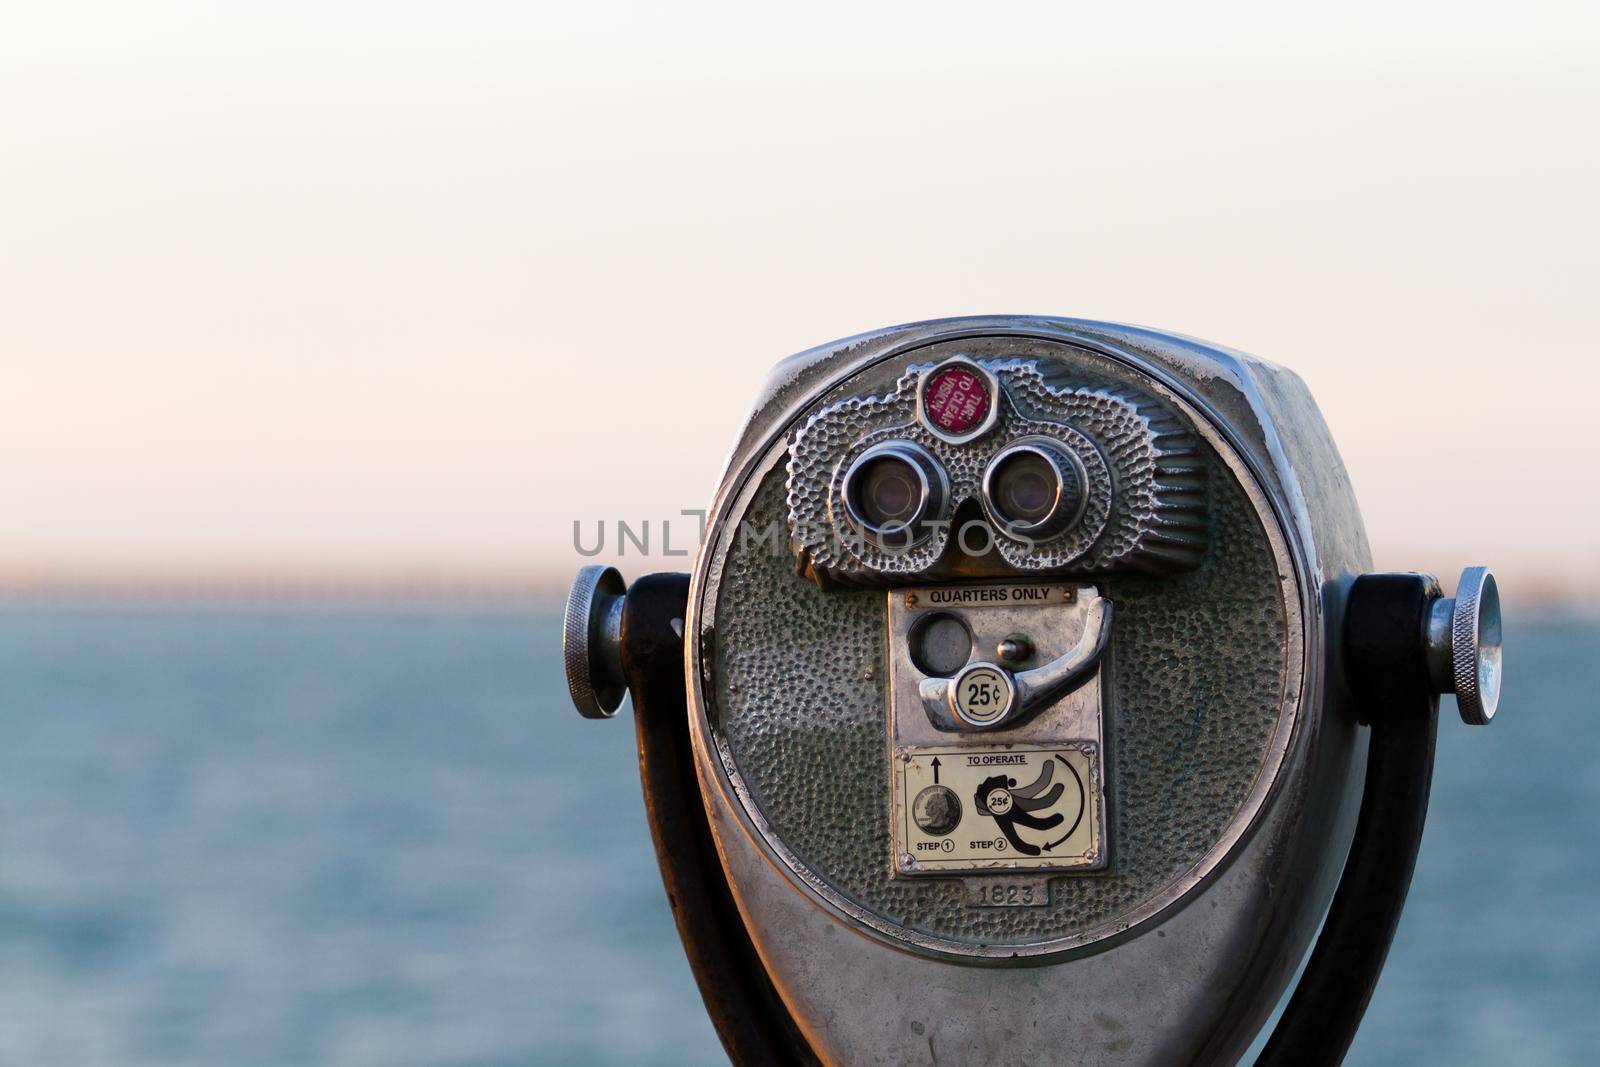 A coin operated view finder in tourist location.